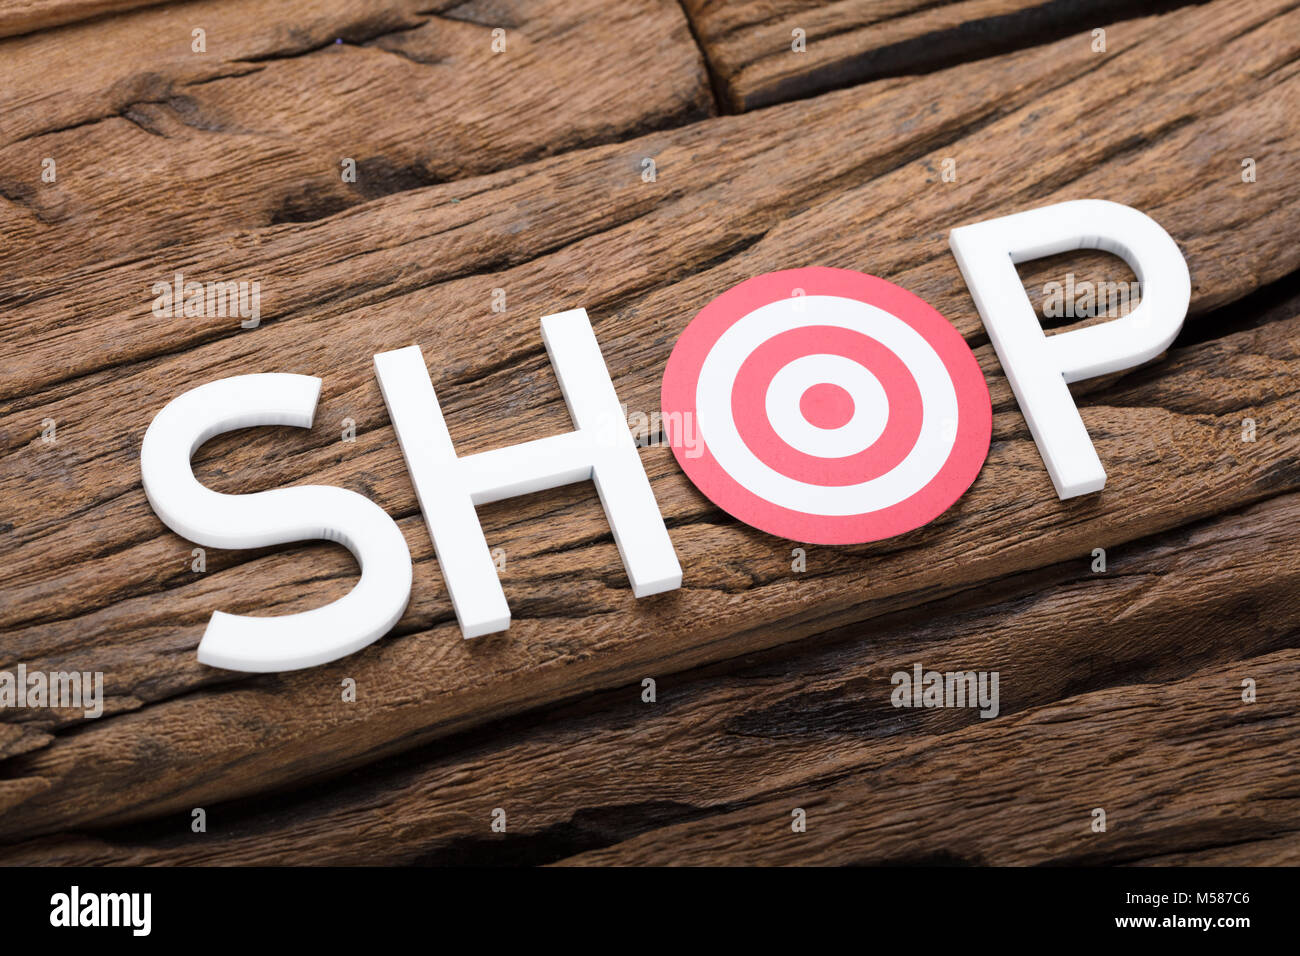 High angle view of shop text with dartboard on wooden table Stock Photo